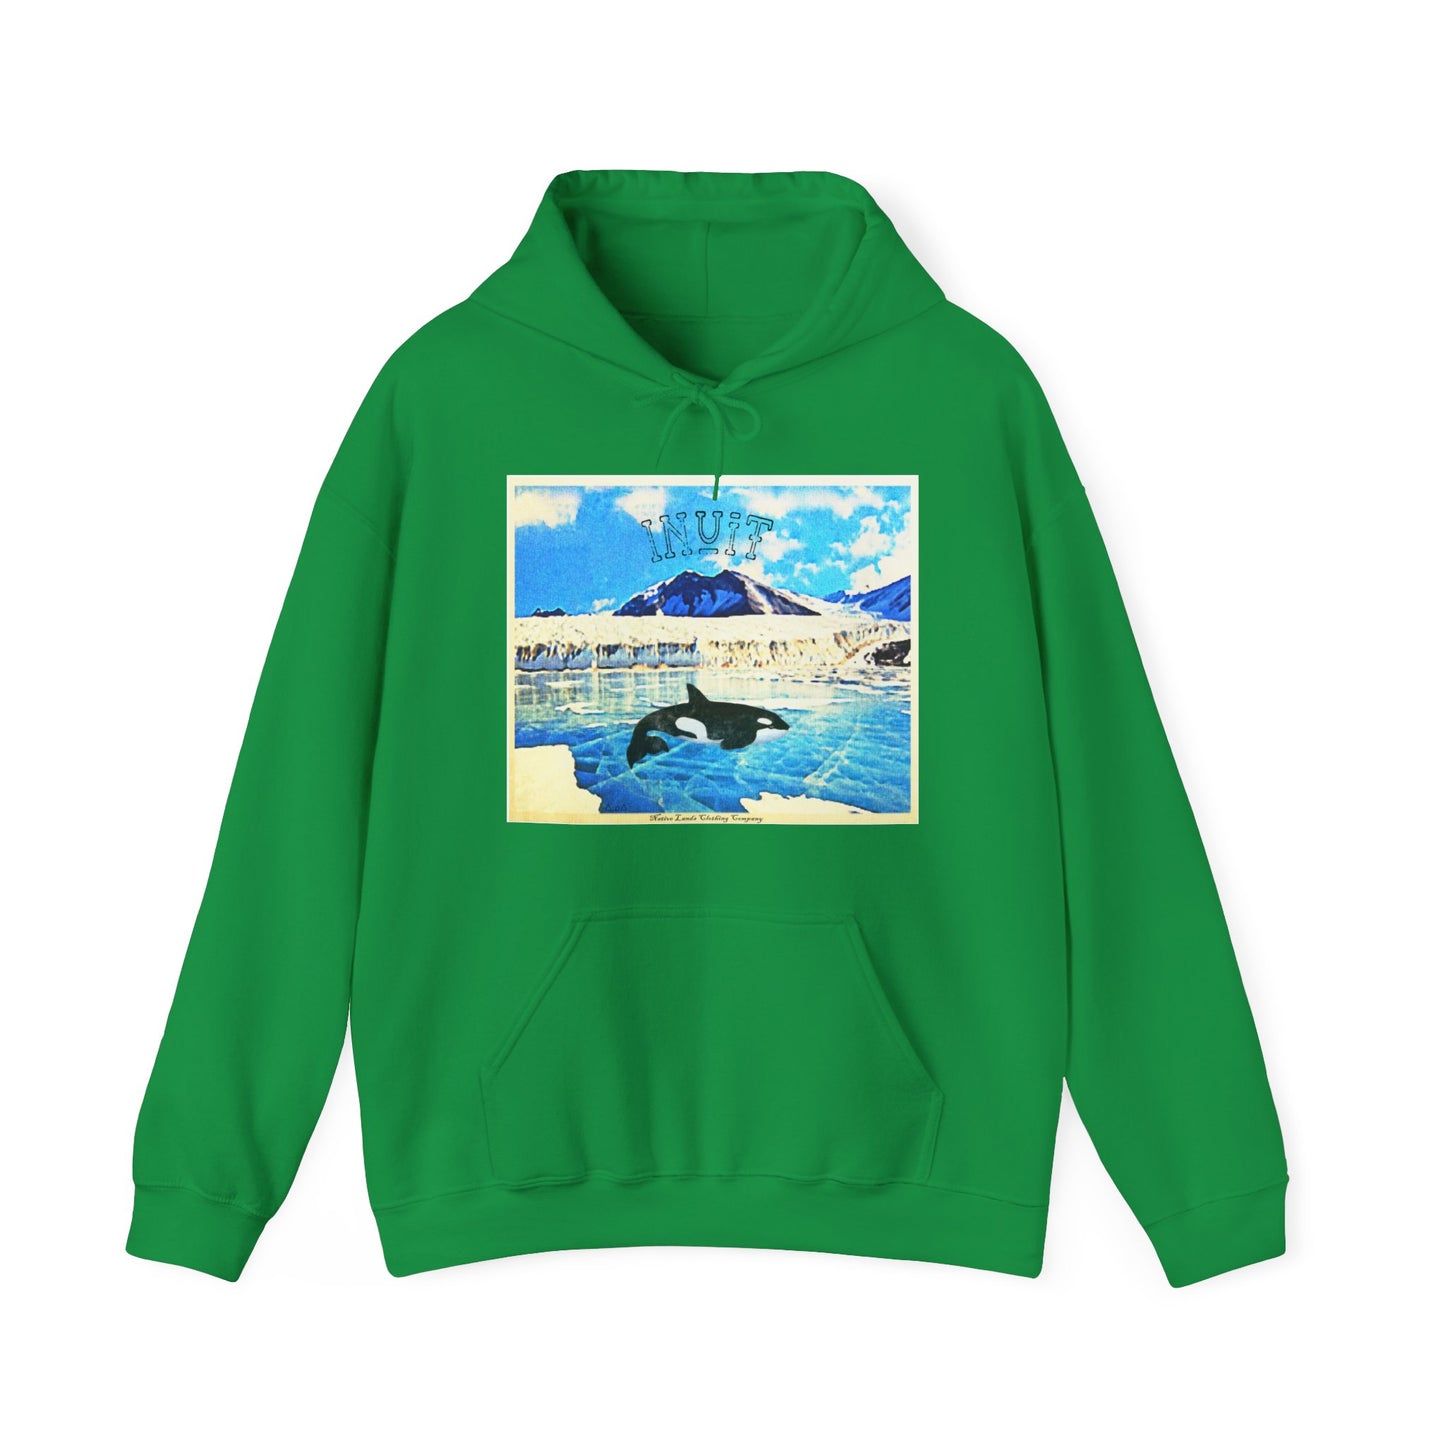 Inuit Tribe Hoodie Orca - First Nations, Canadian Aboriginal, Indigenous, Native American